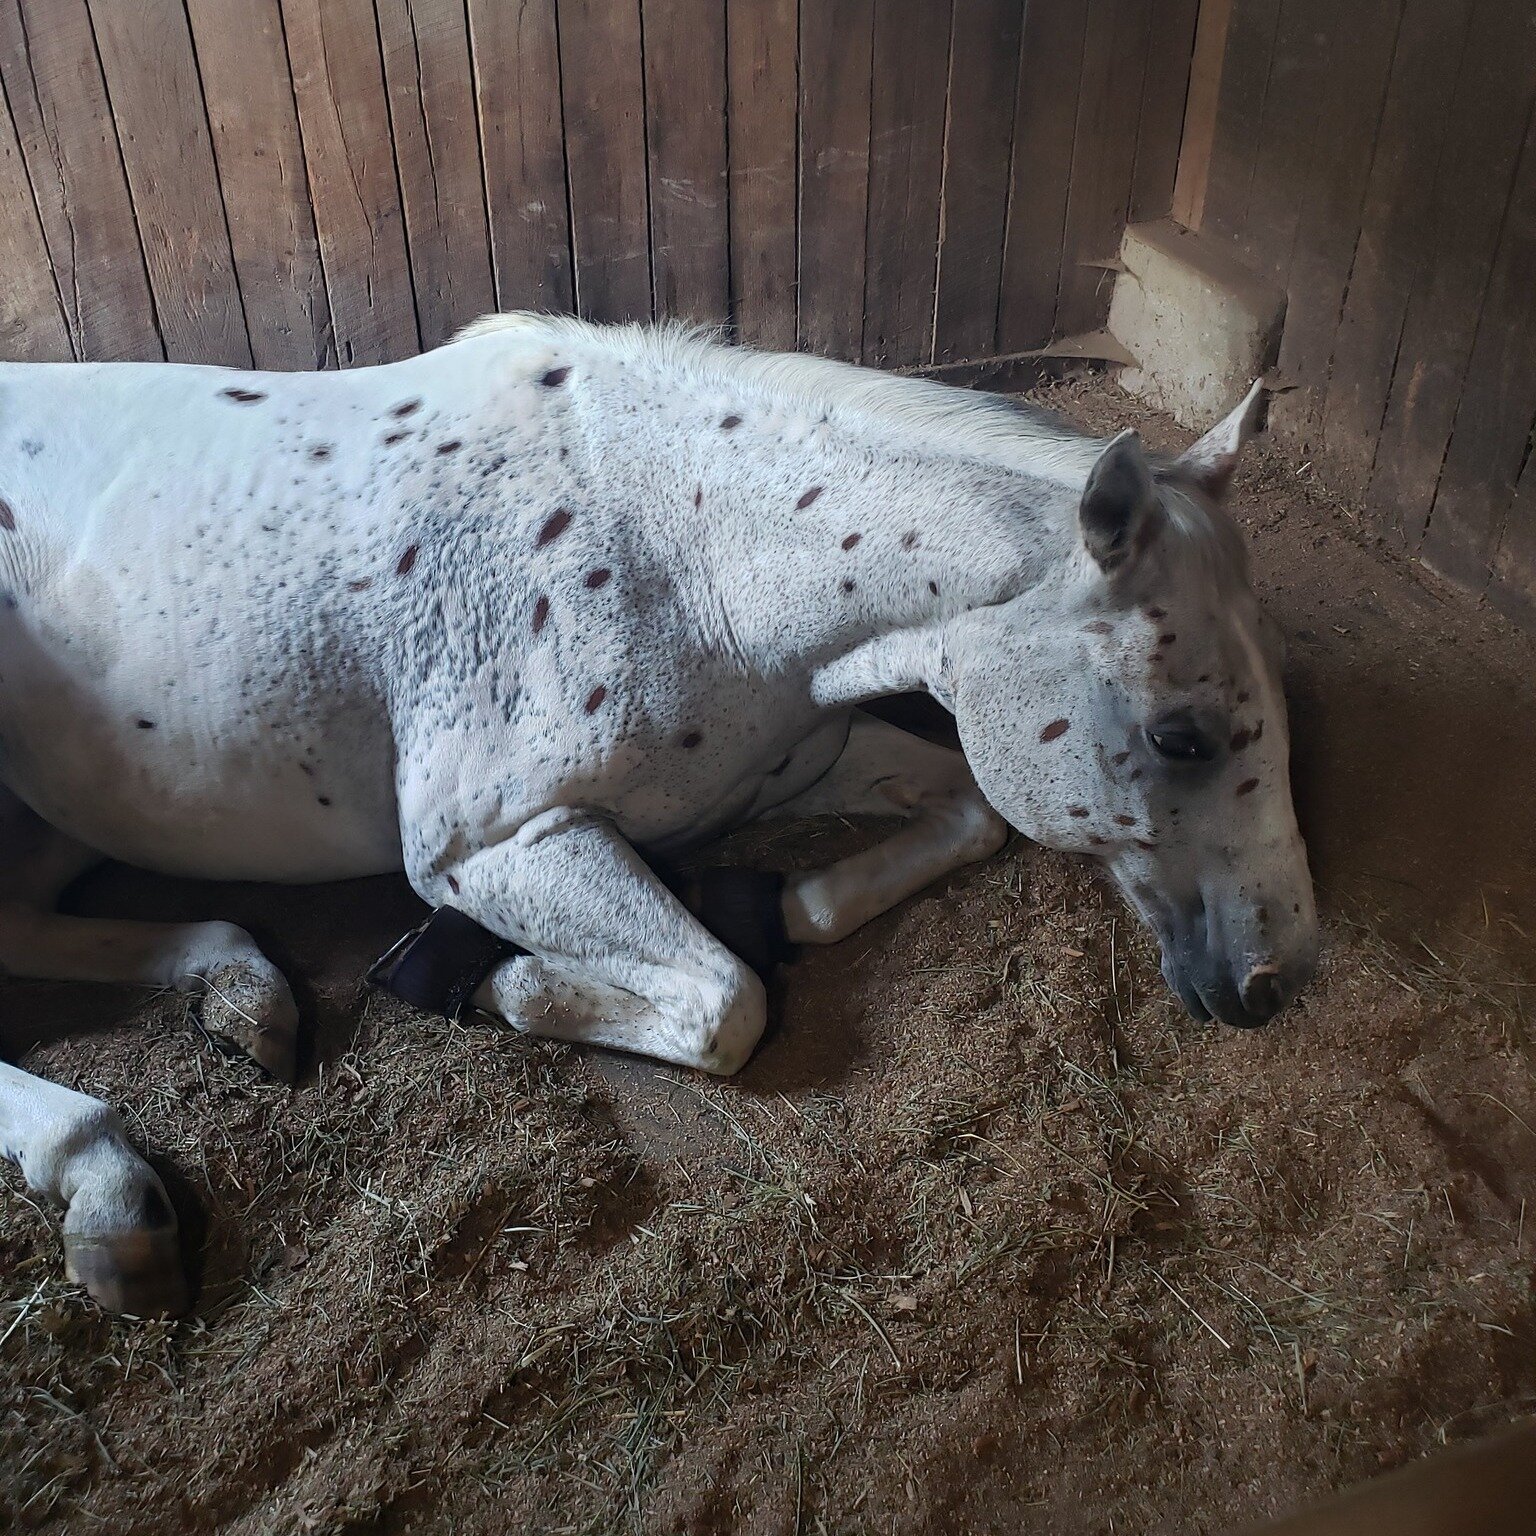 A misconception that I hear quite a bit especially from the kids is that horses always sleep standing up. While they can lock their joints and nap standing up, Splash here is very fond of his snoozes in his stall. If you pass the gelding's field on a